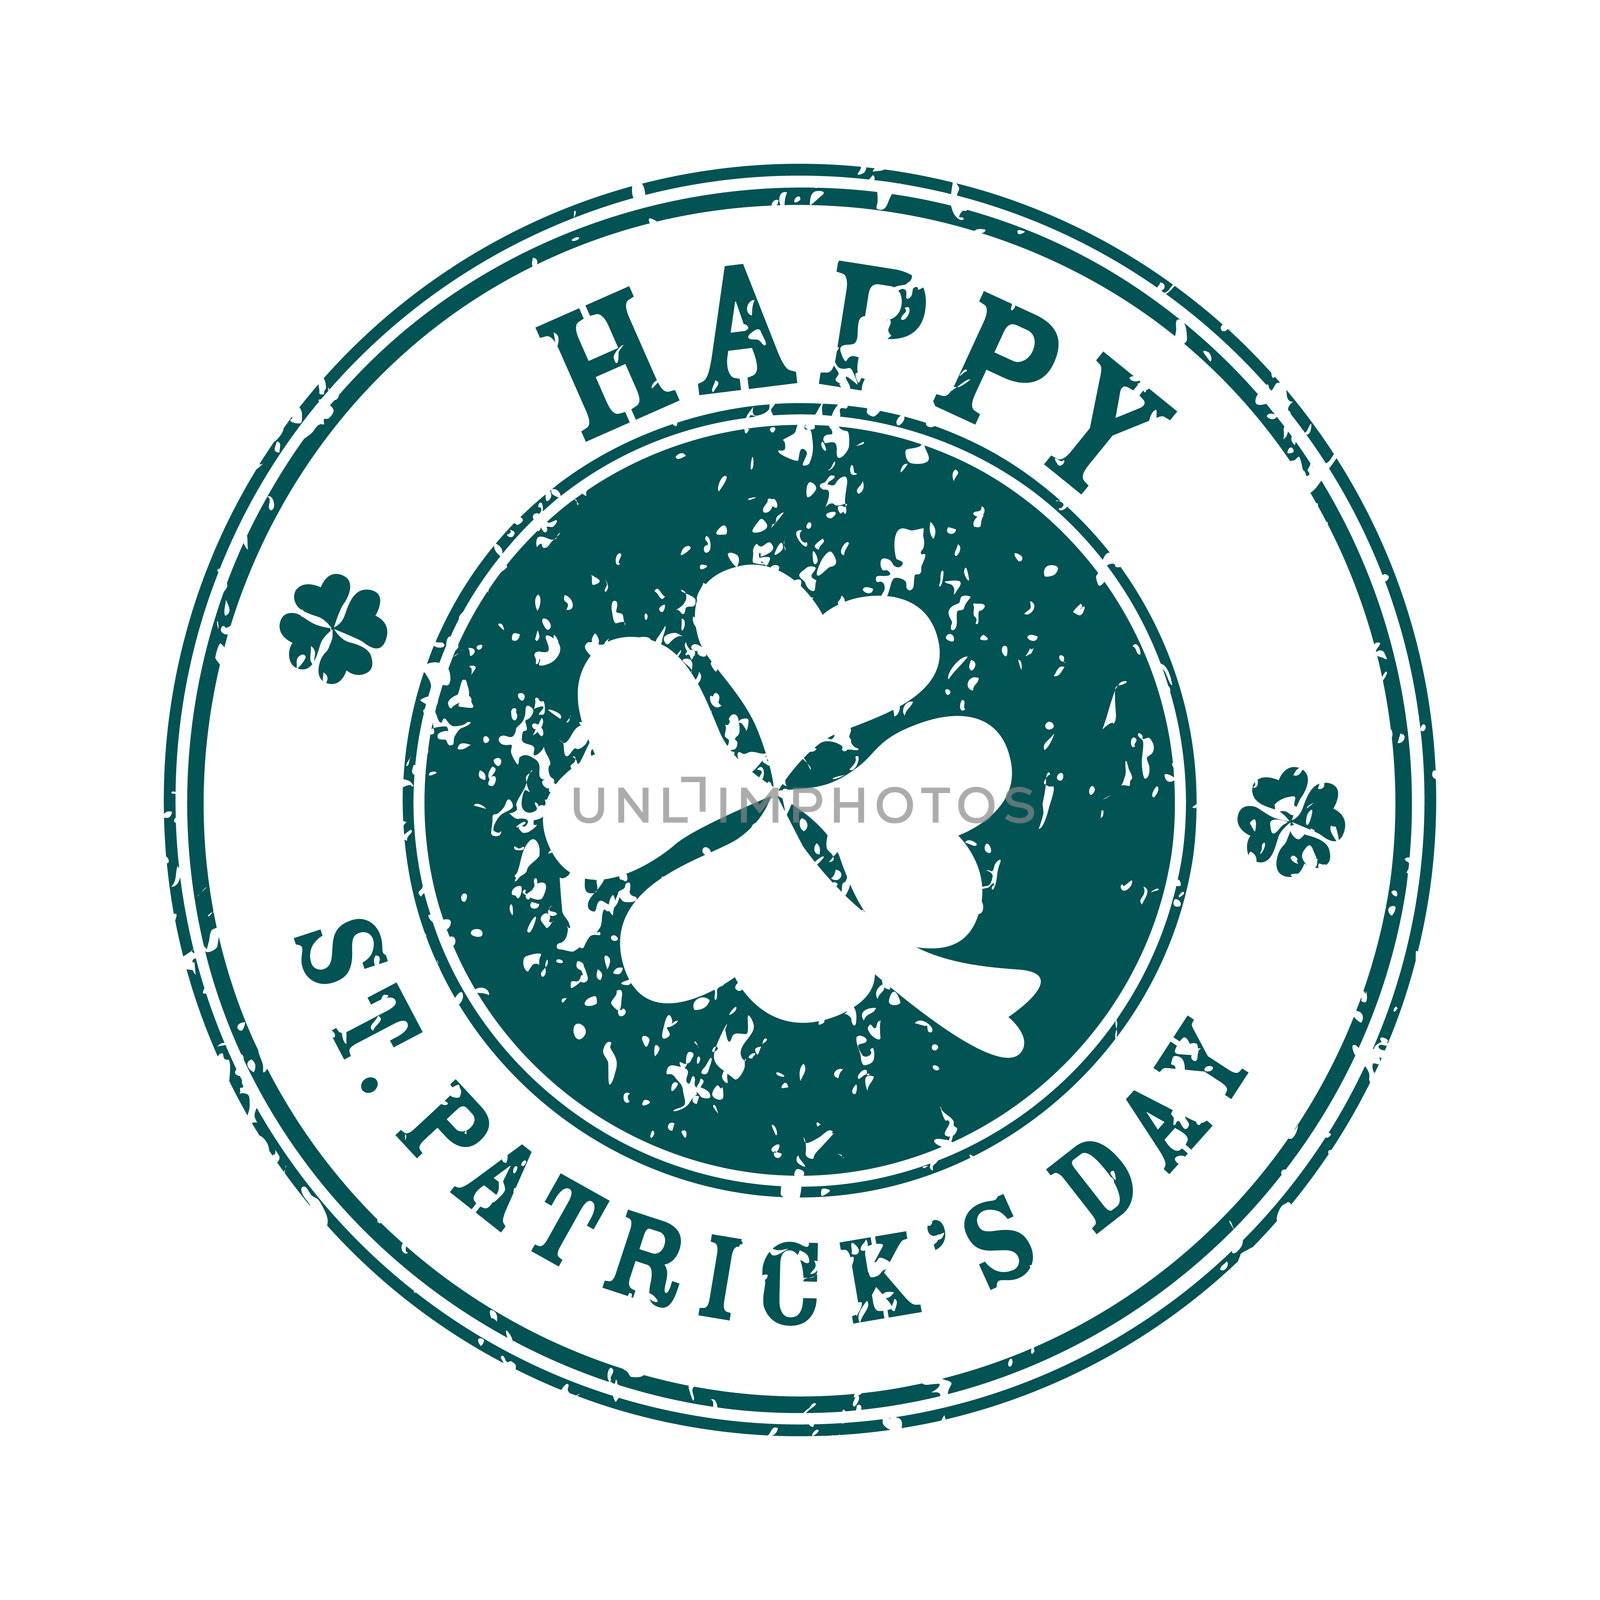 Happy Saint Patrick's Day stamp over white, greetings